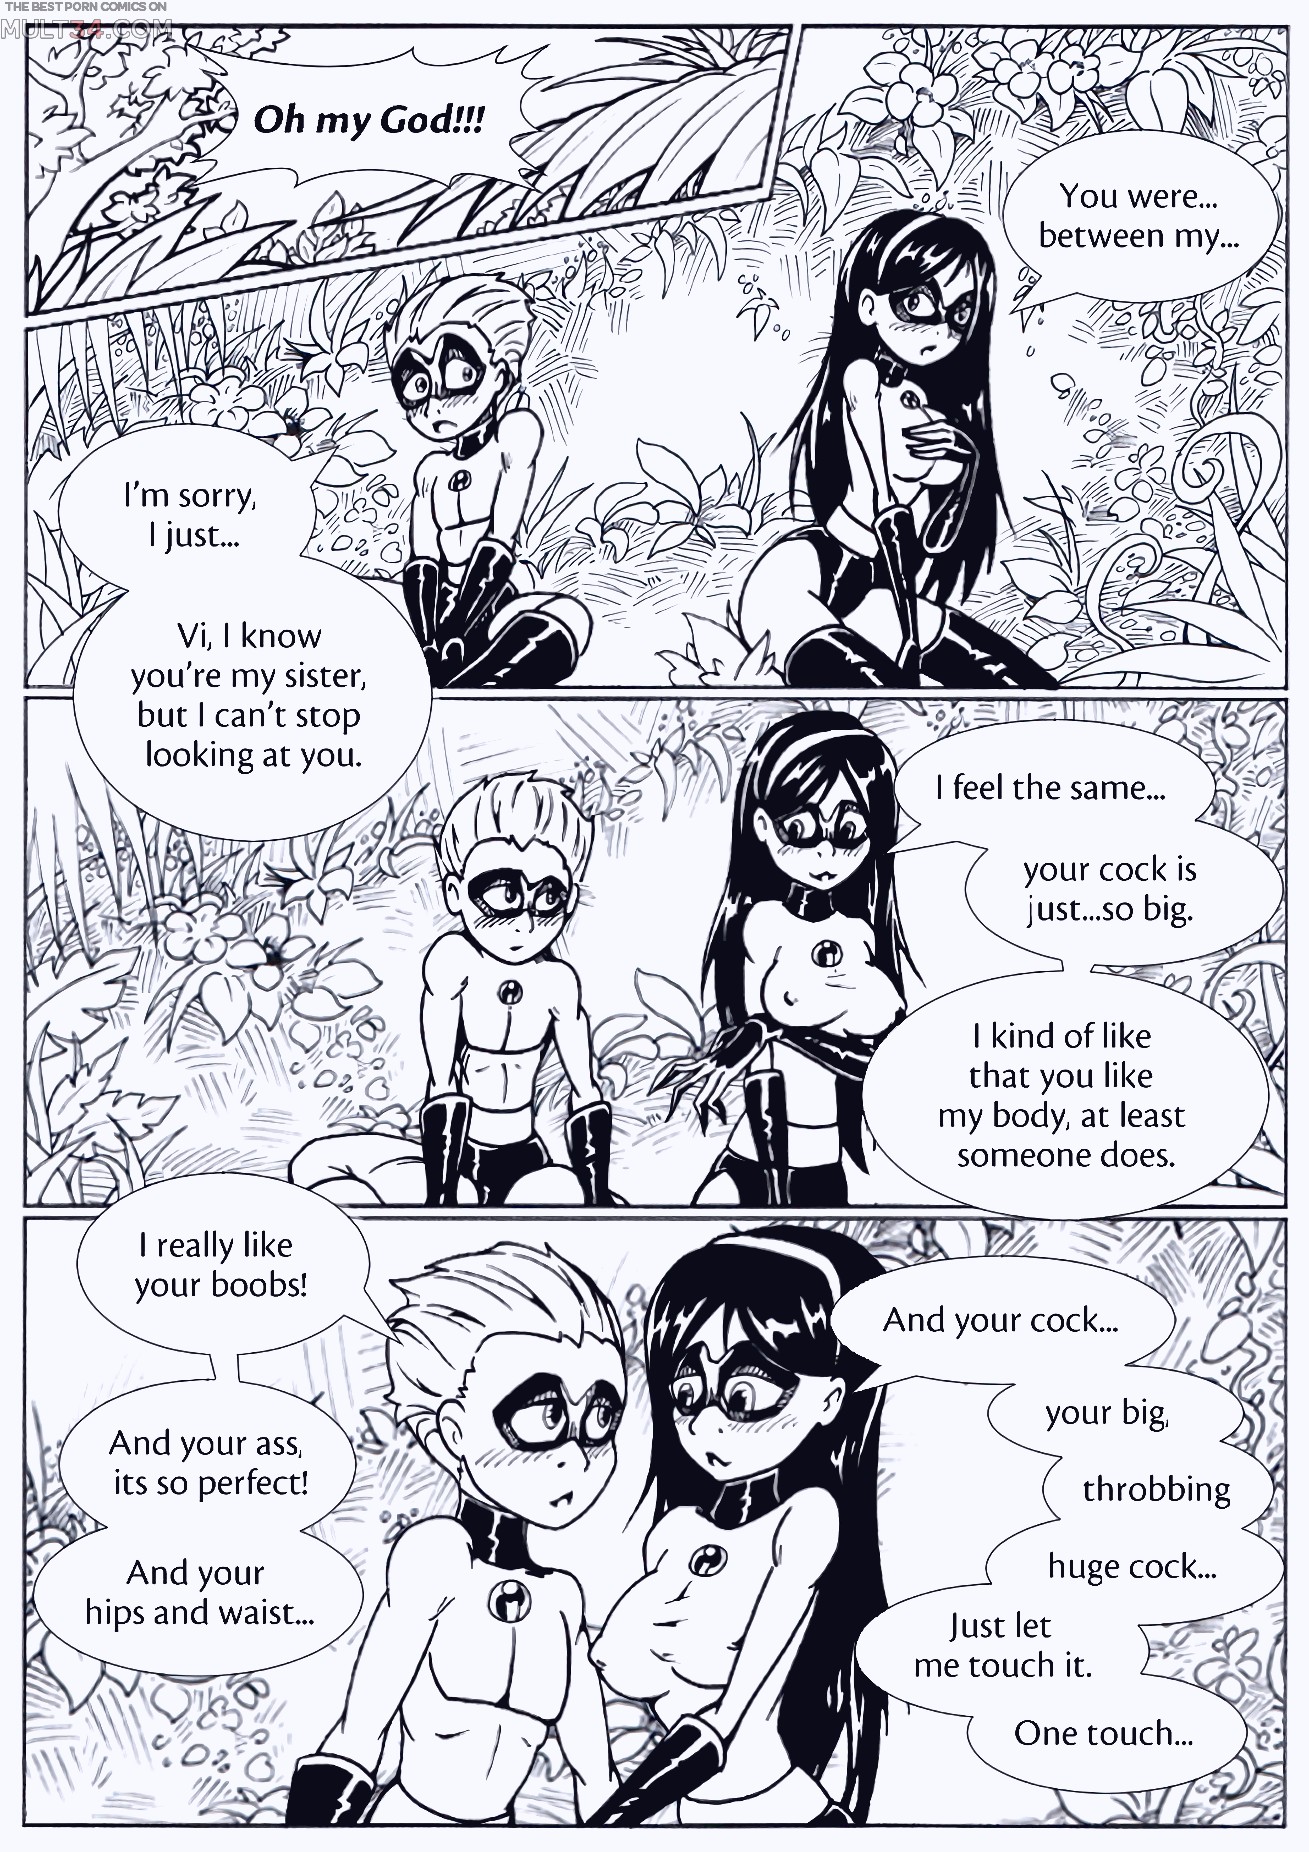 Insect Cartoon Porn Incredibles - Incestibles porn comic - the best cartoon porn comics, Rule 34 | MULT34